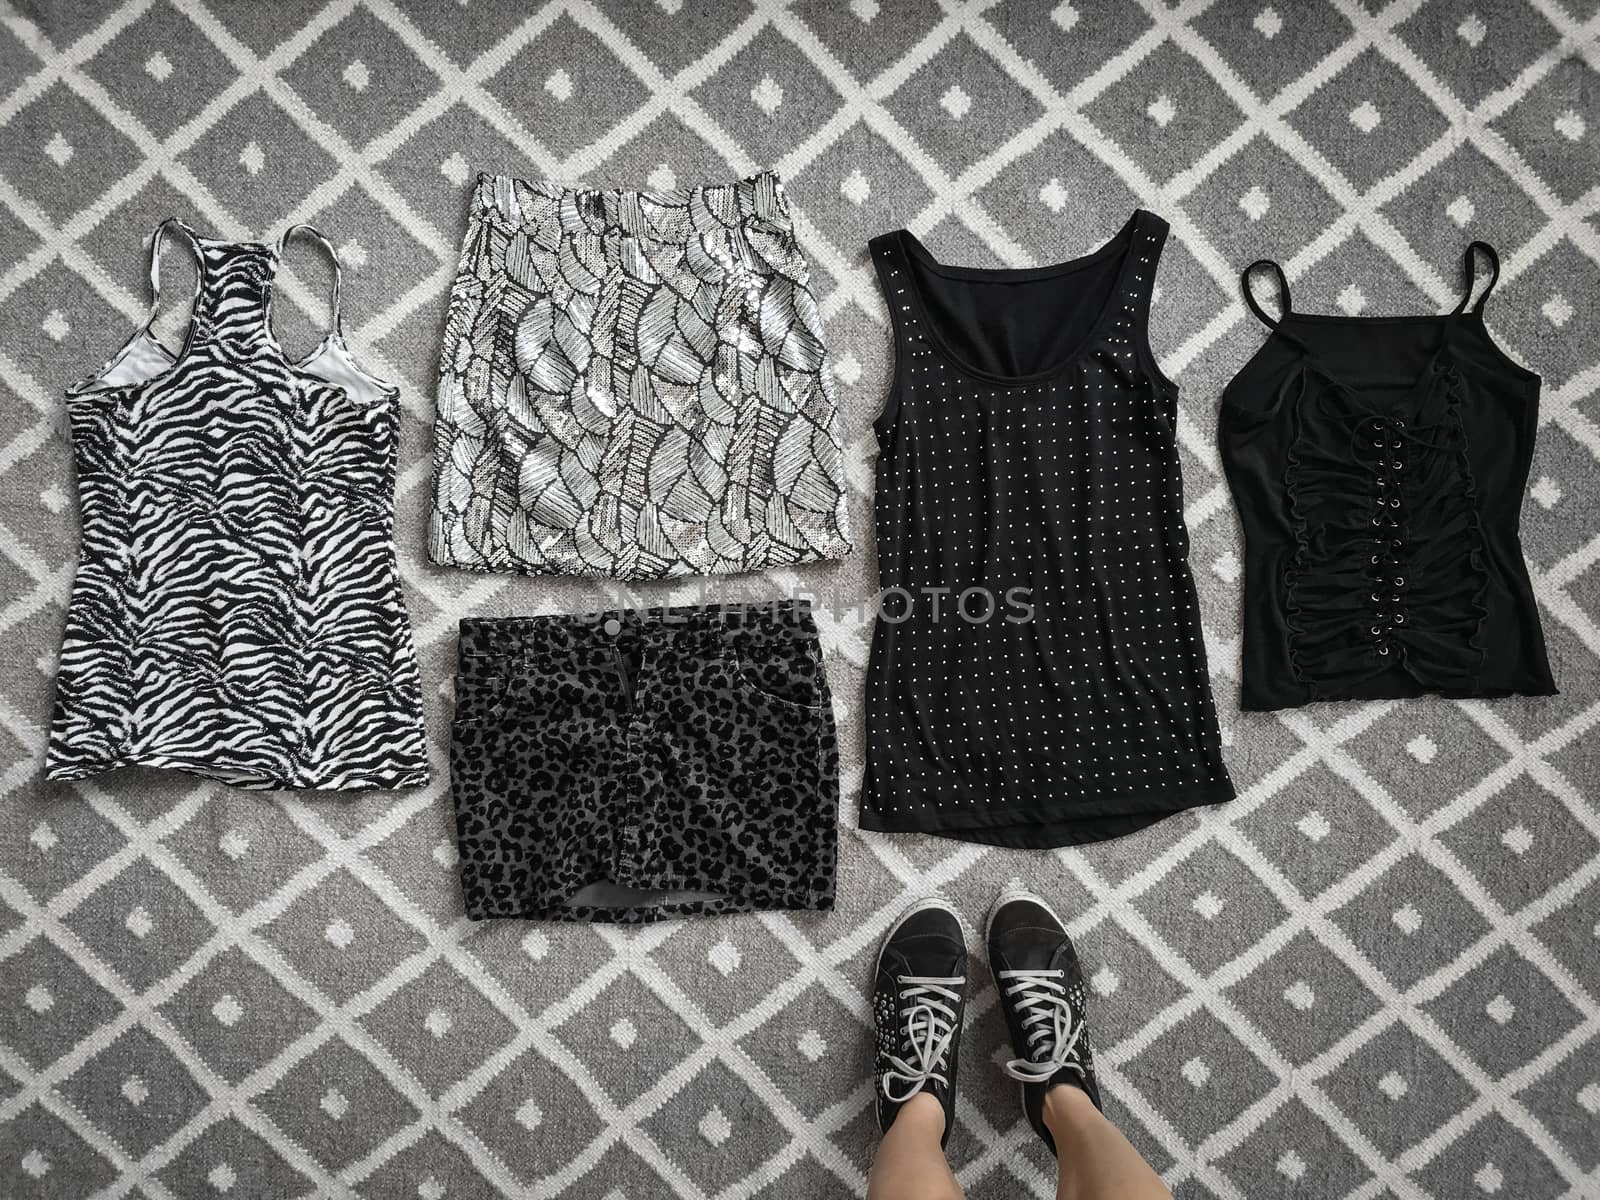 Choice of stylish black and white clothes on the floor, woman standing near it.